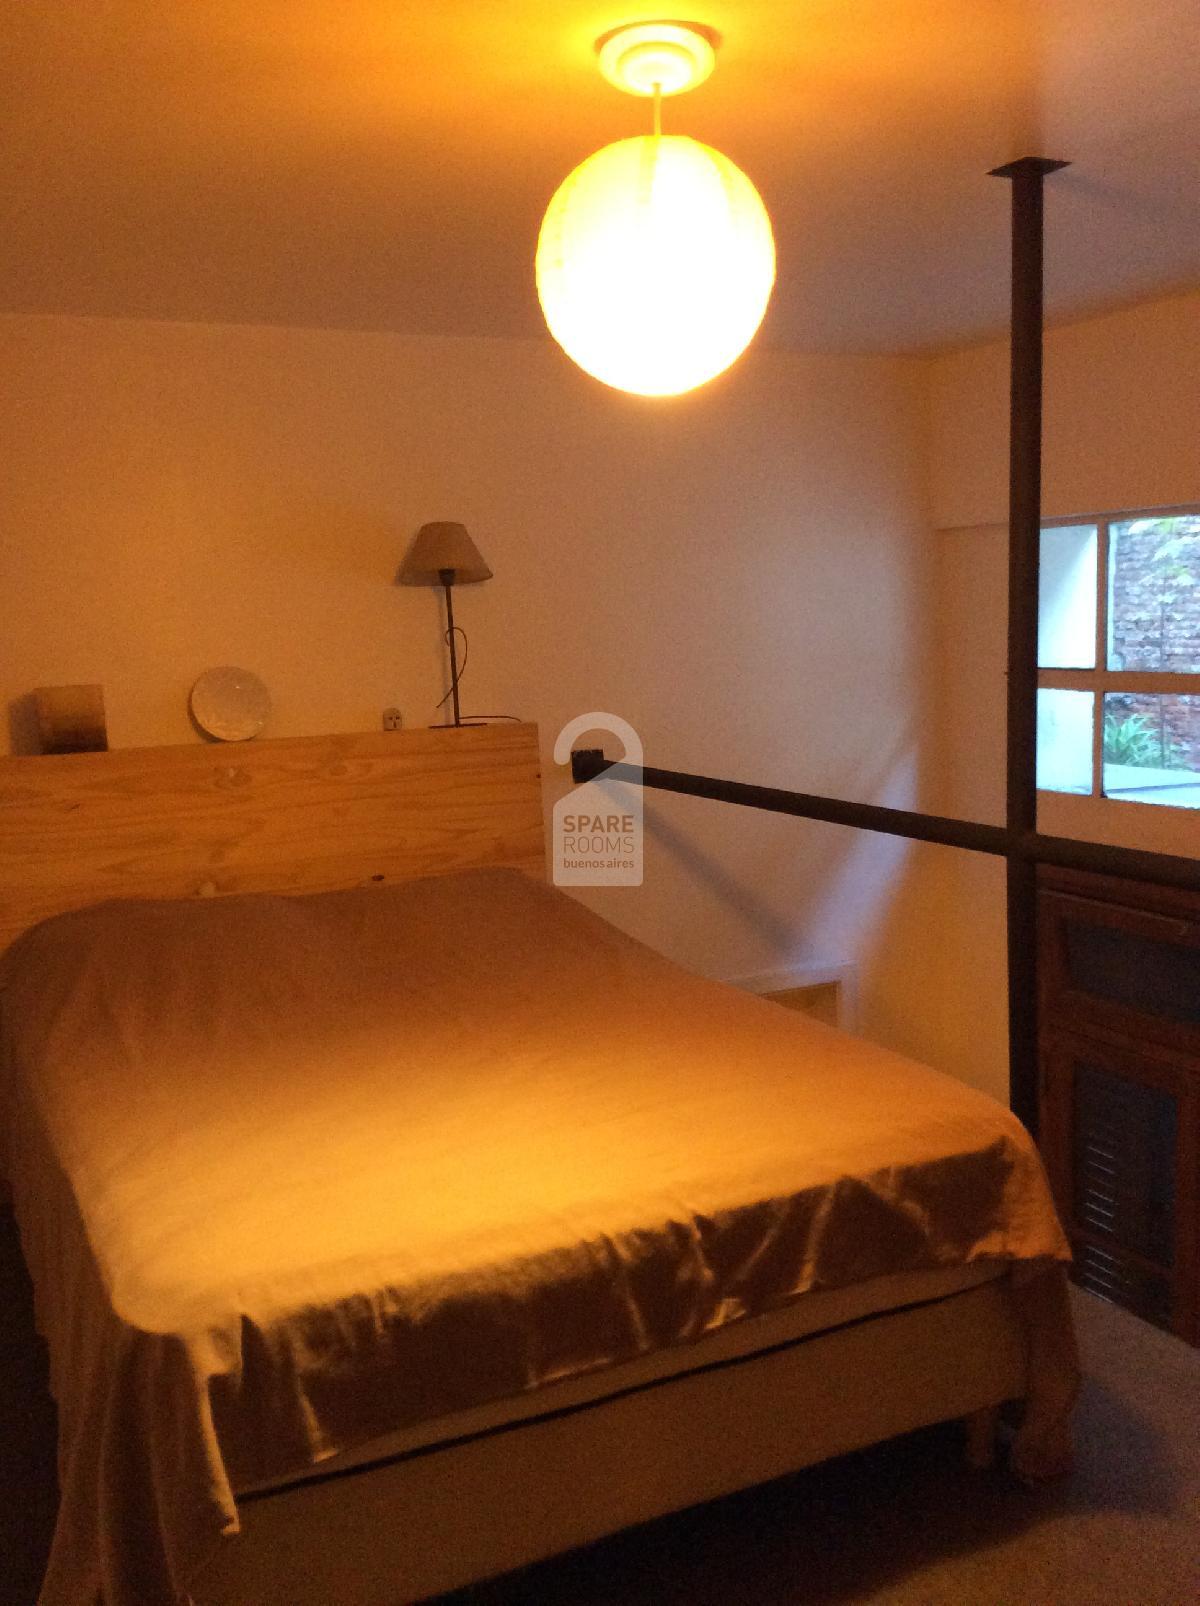 Doble bed for 1 person in San Telmo